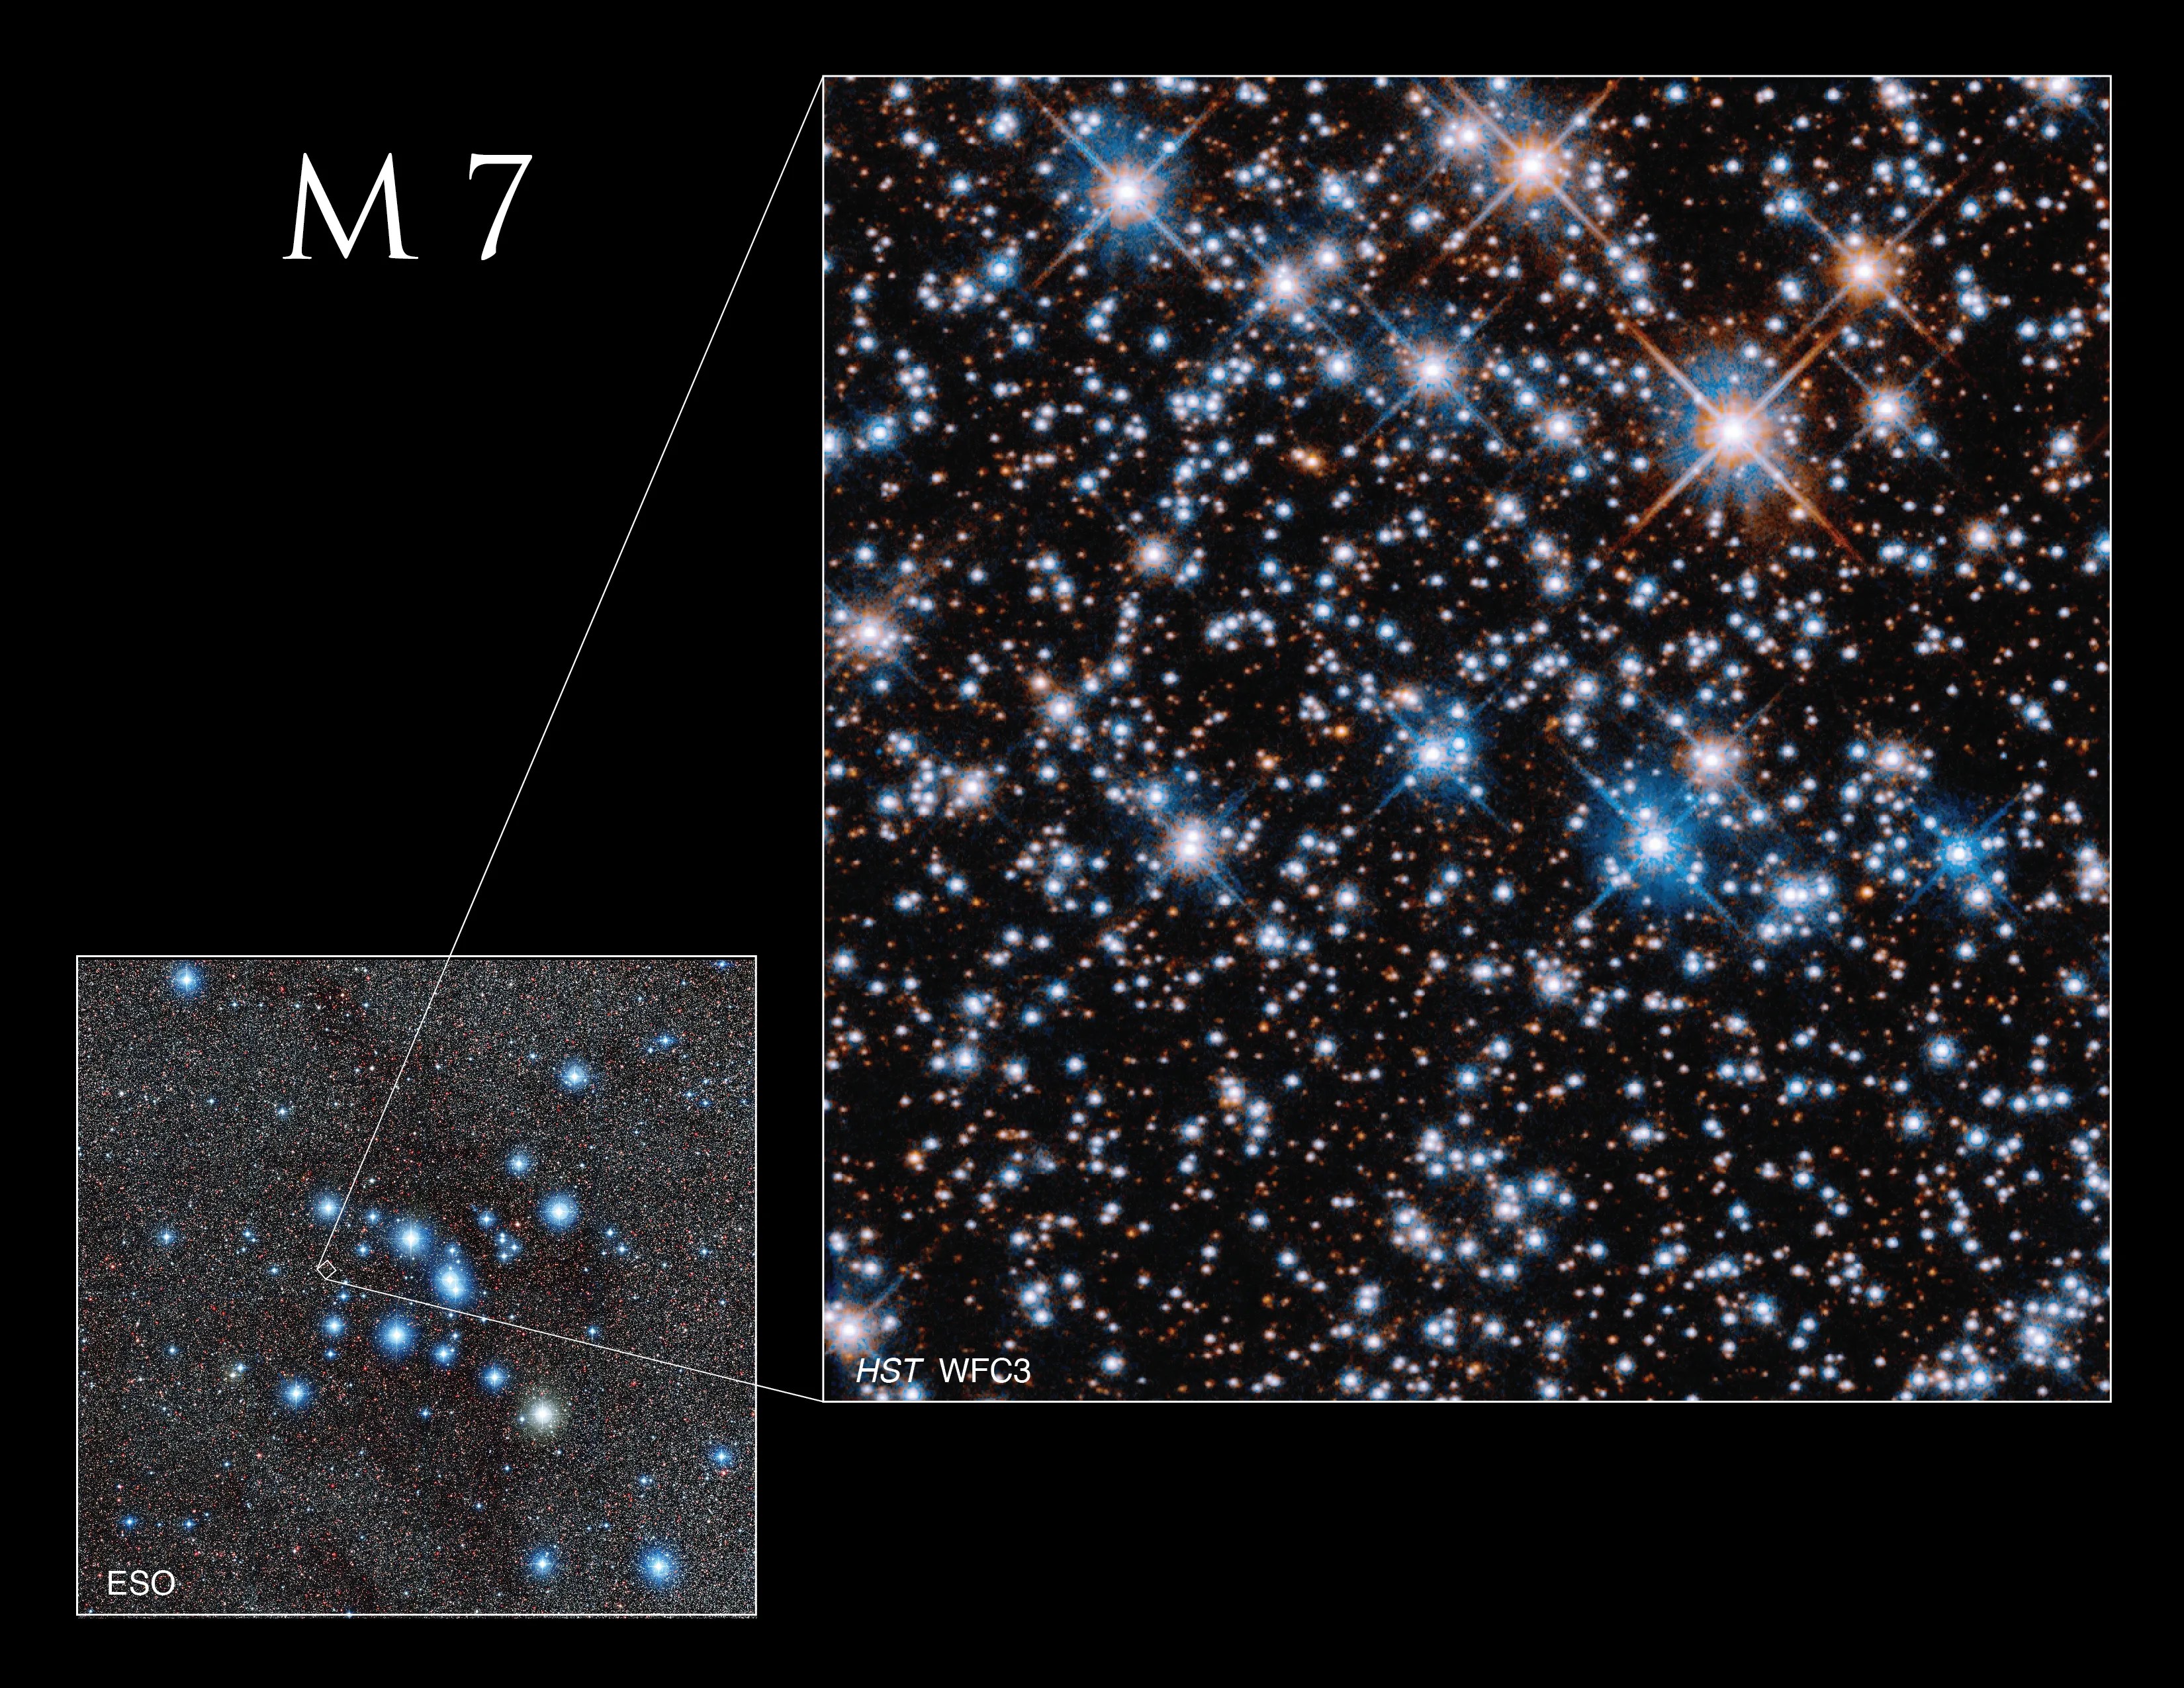 Lower left: small image, faint stars on a black background. Larger blue-white stars dot the scene but are concentrated at image center. Right side: A black background is filled with small, reddish-orange stars and scattered with larger blue-white stars.